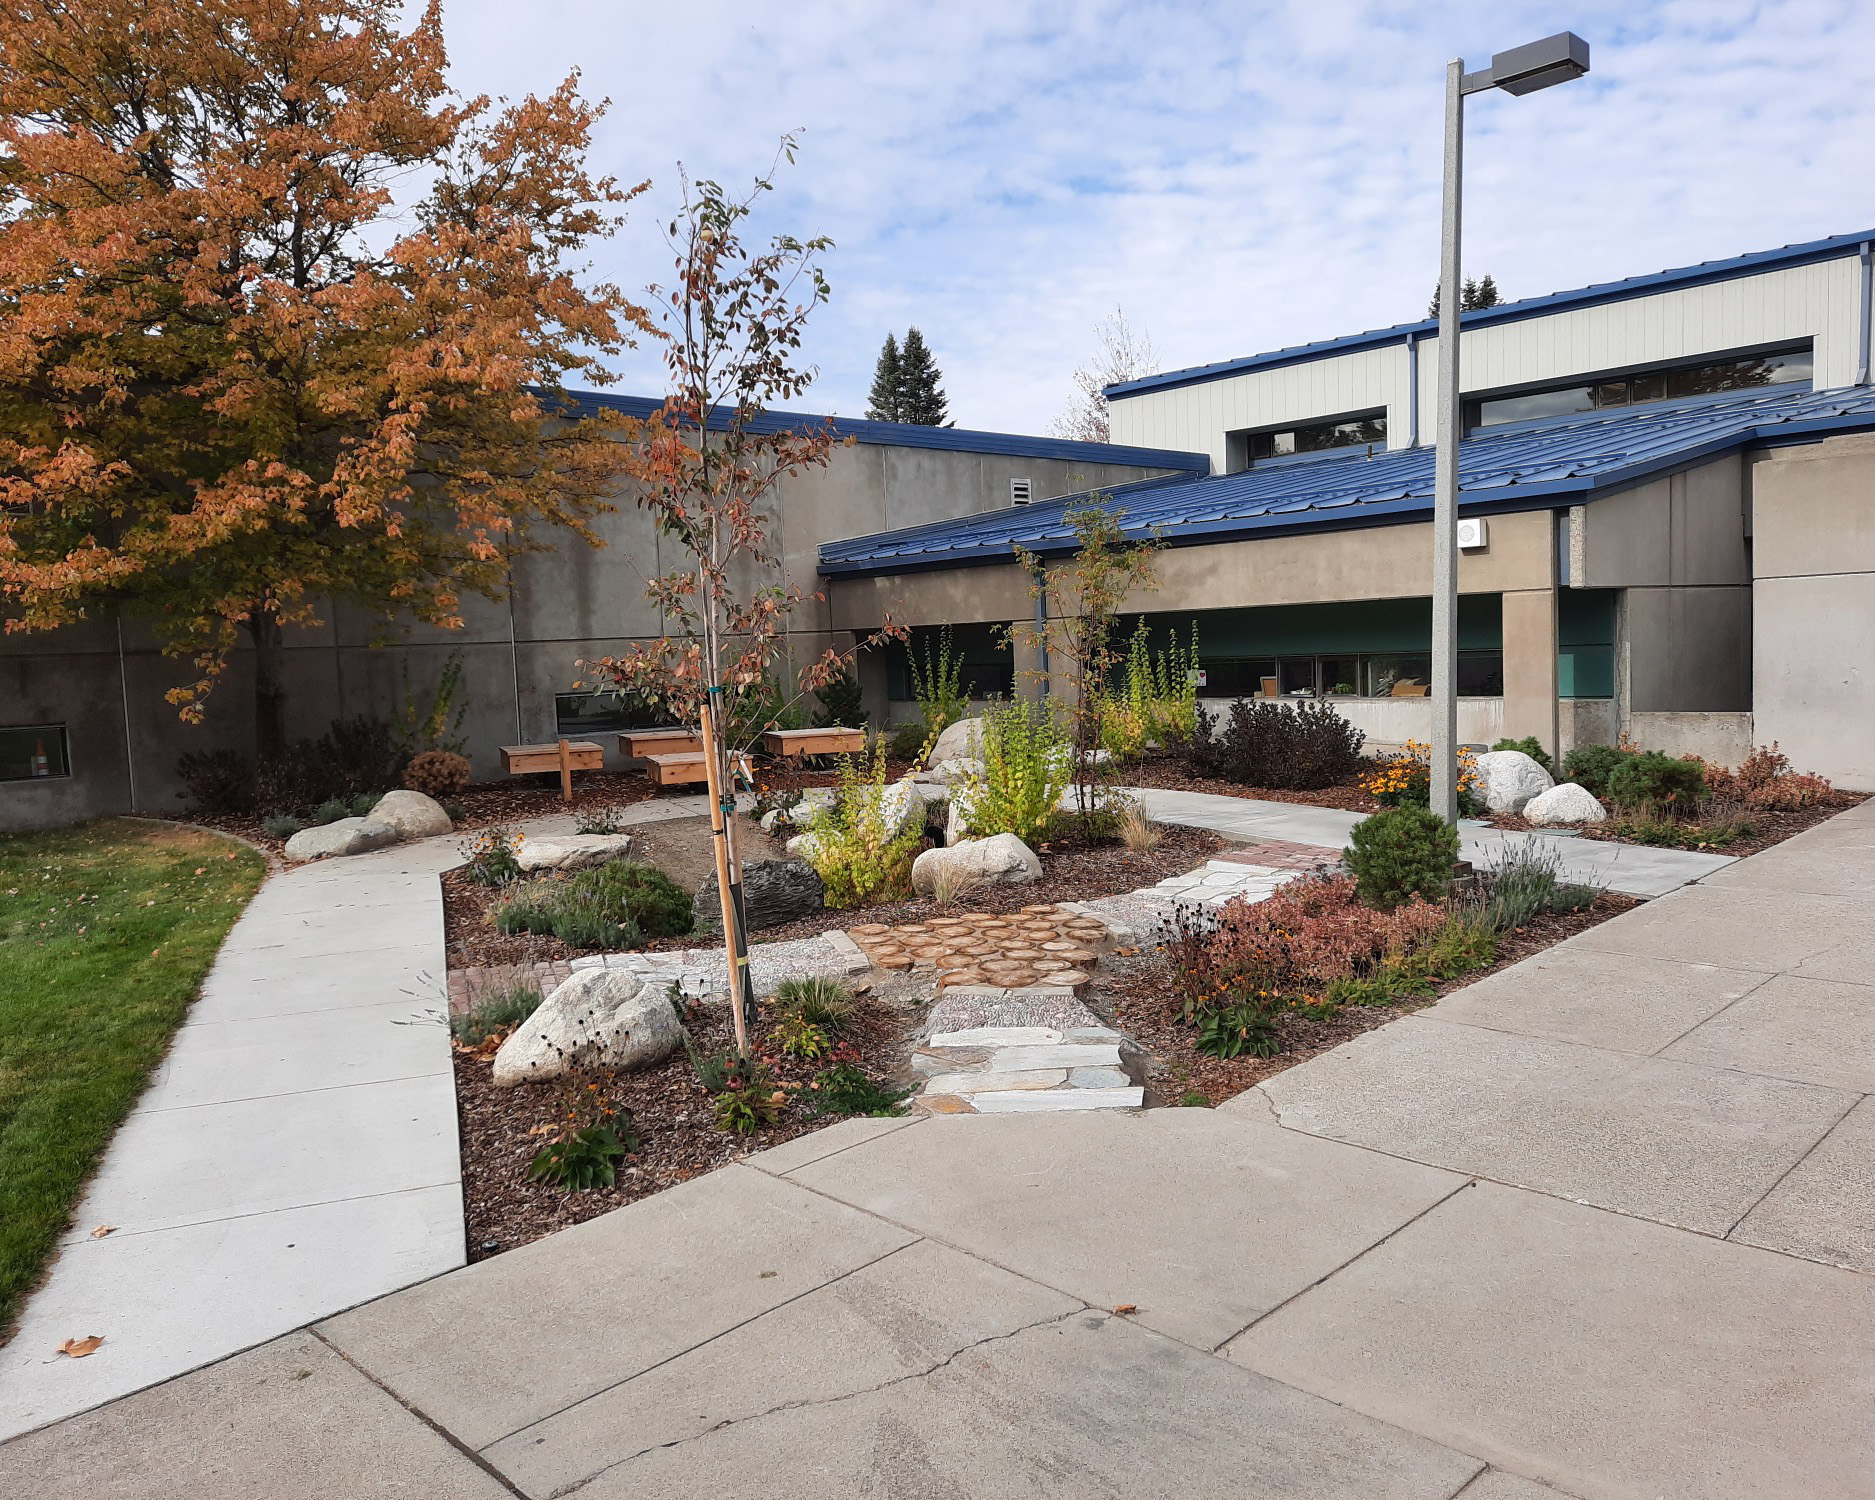 Outdoor Learning Lab at Bemiss Elementary, rain garden and sensory pathway are in the center of the image and learning platforms with benches and the school building in the background.